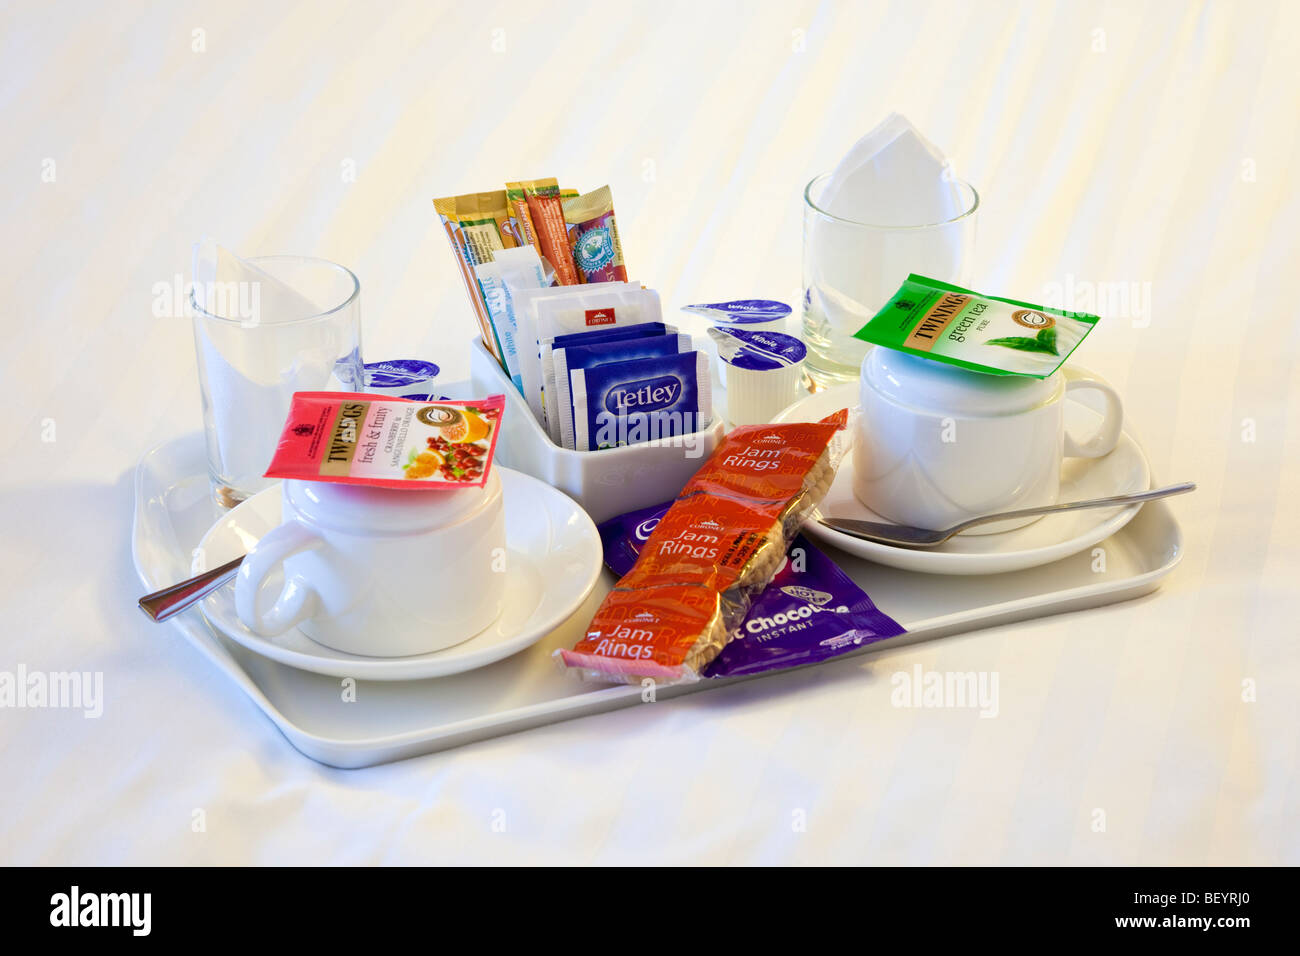 Tea and coffee tray on a hotel room bed Stock Photo